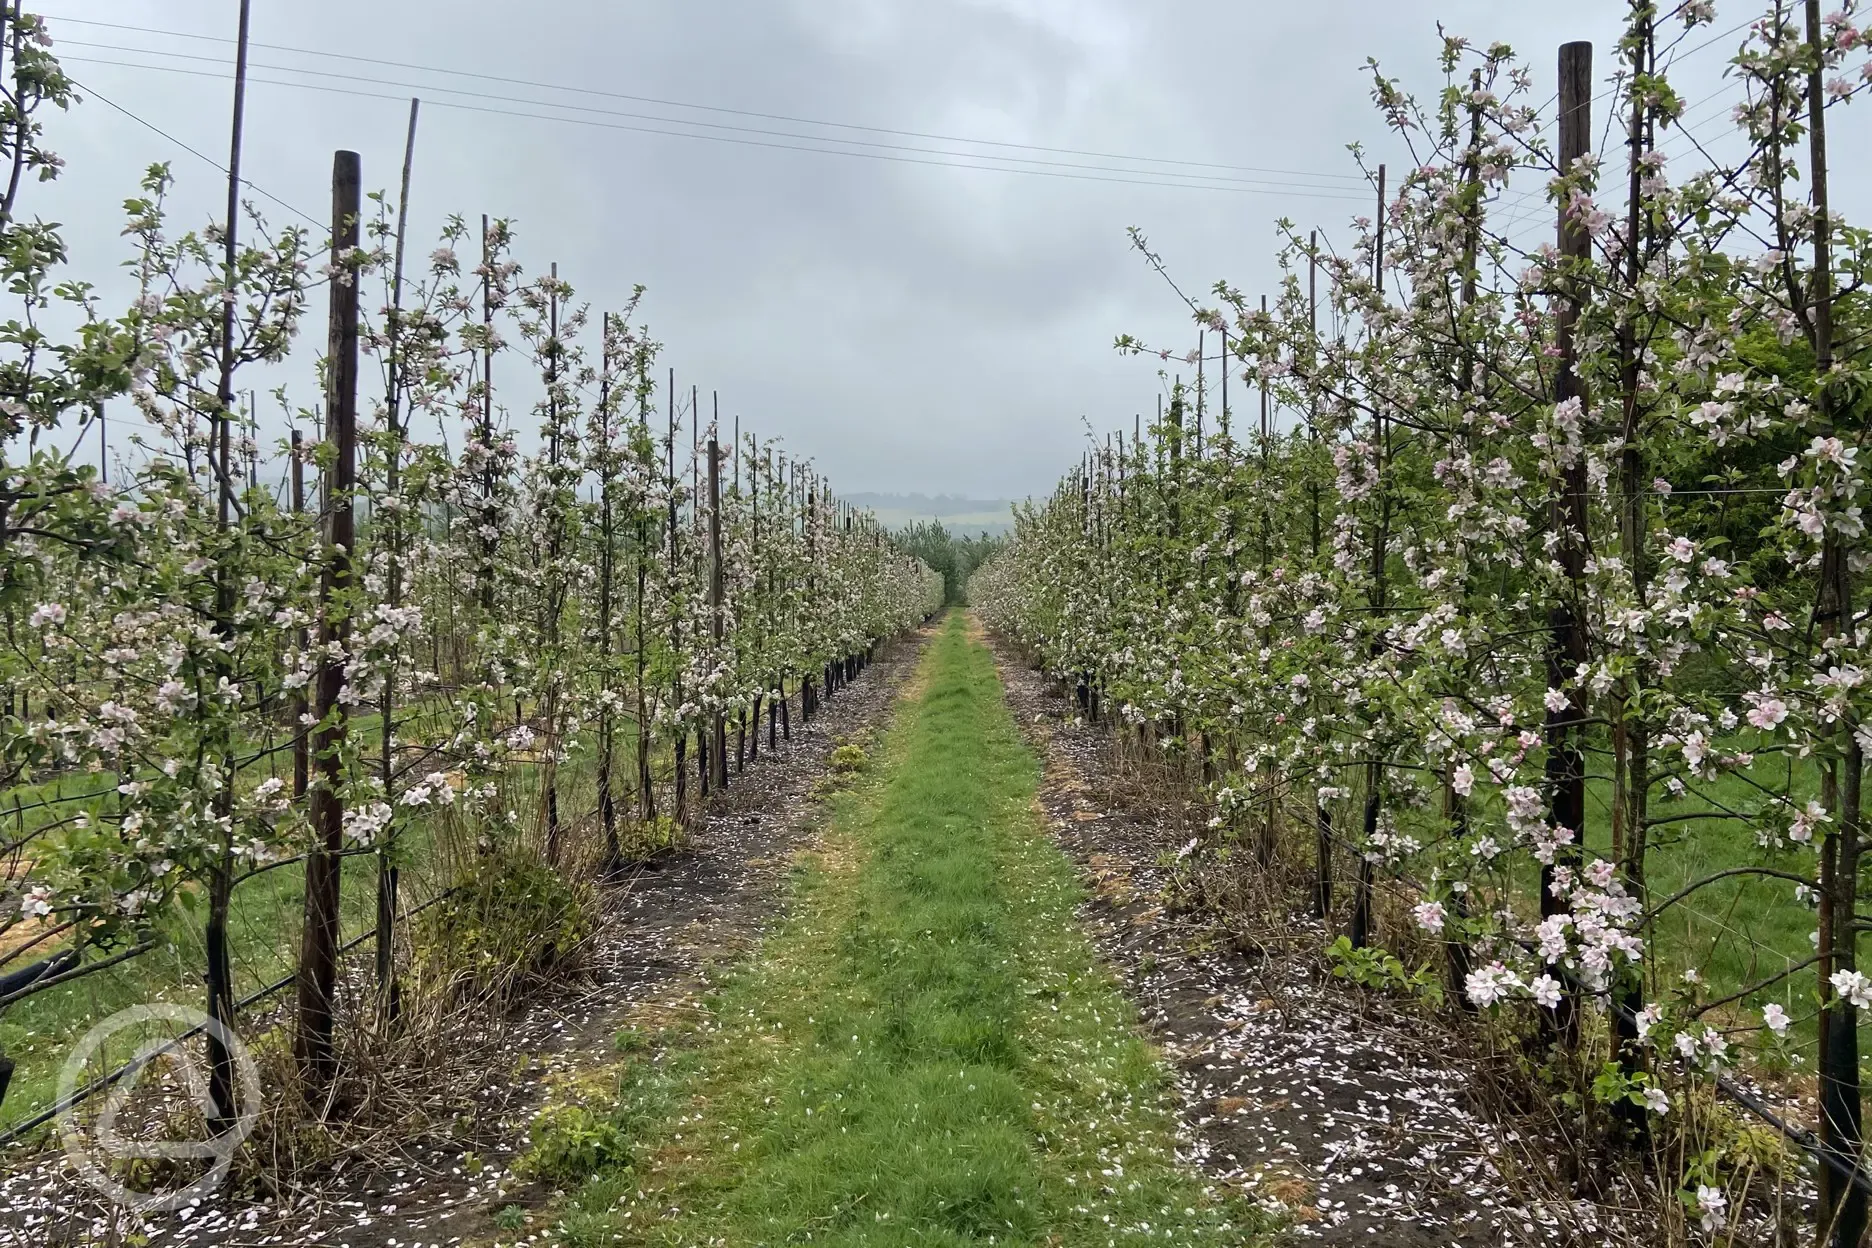 There are 6 various types of Apple trees in the top orchard